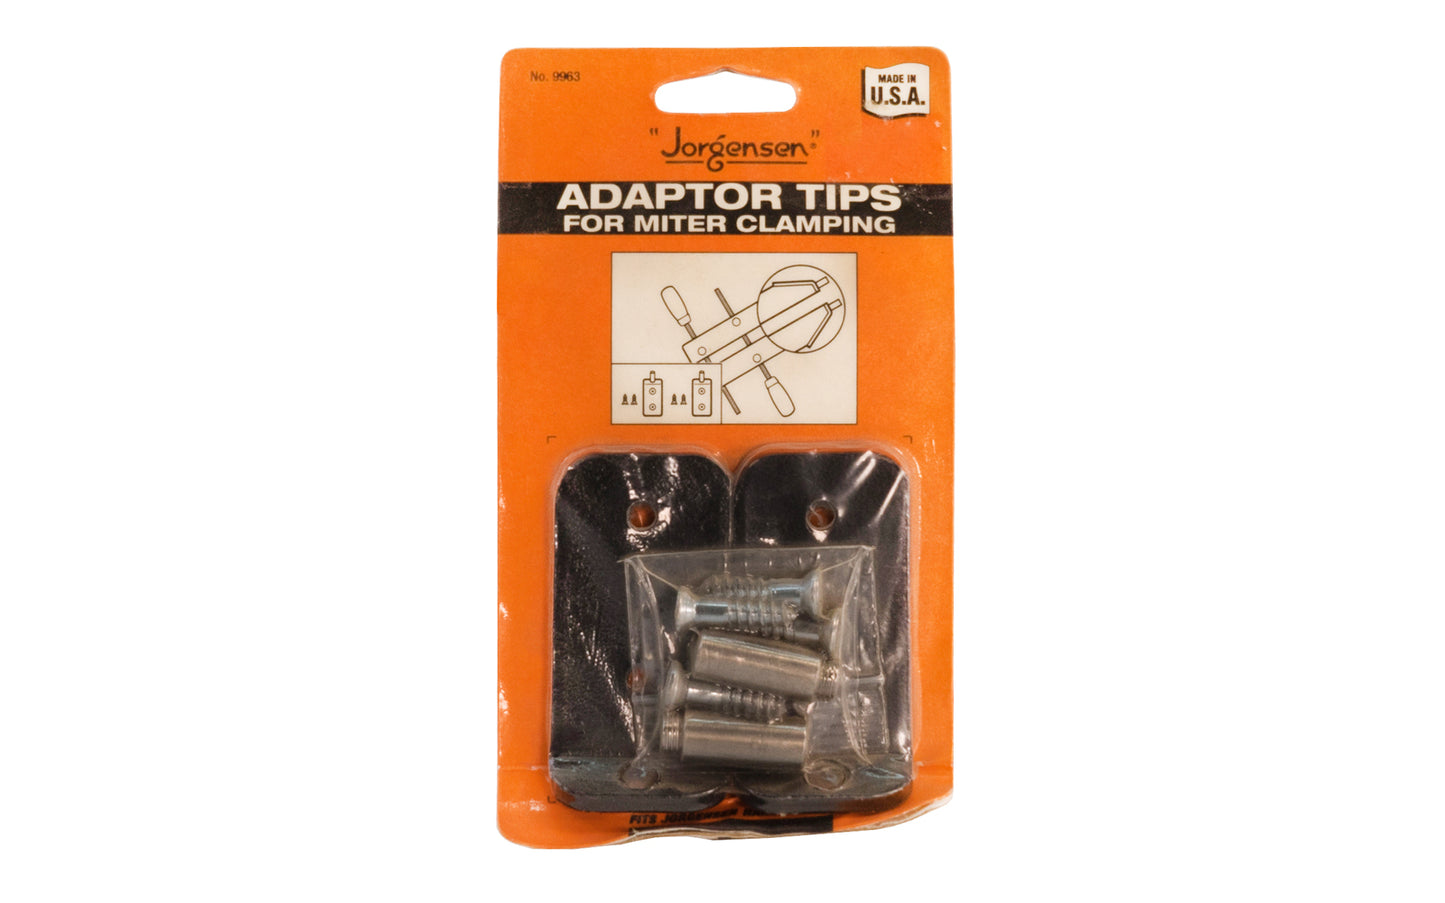 Jorgensen Adaptor Tips for Miter Clamping - Model No. 9963.  Made in USA. 044295996303